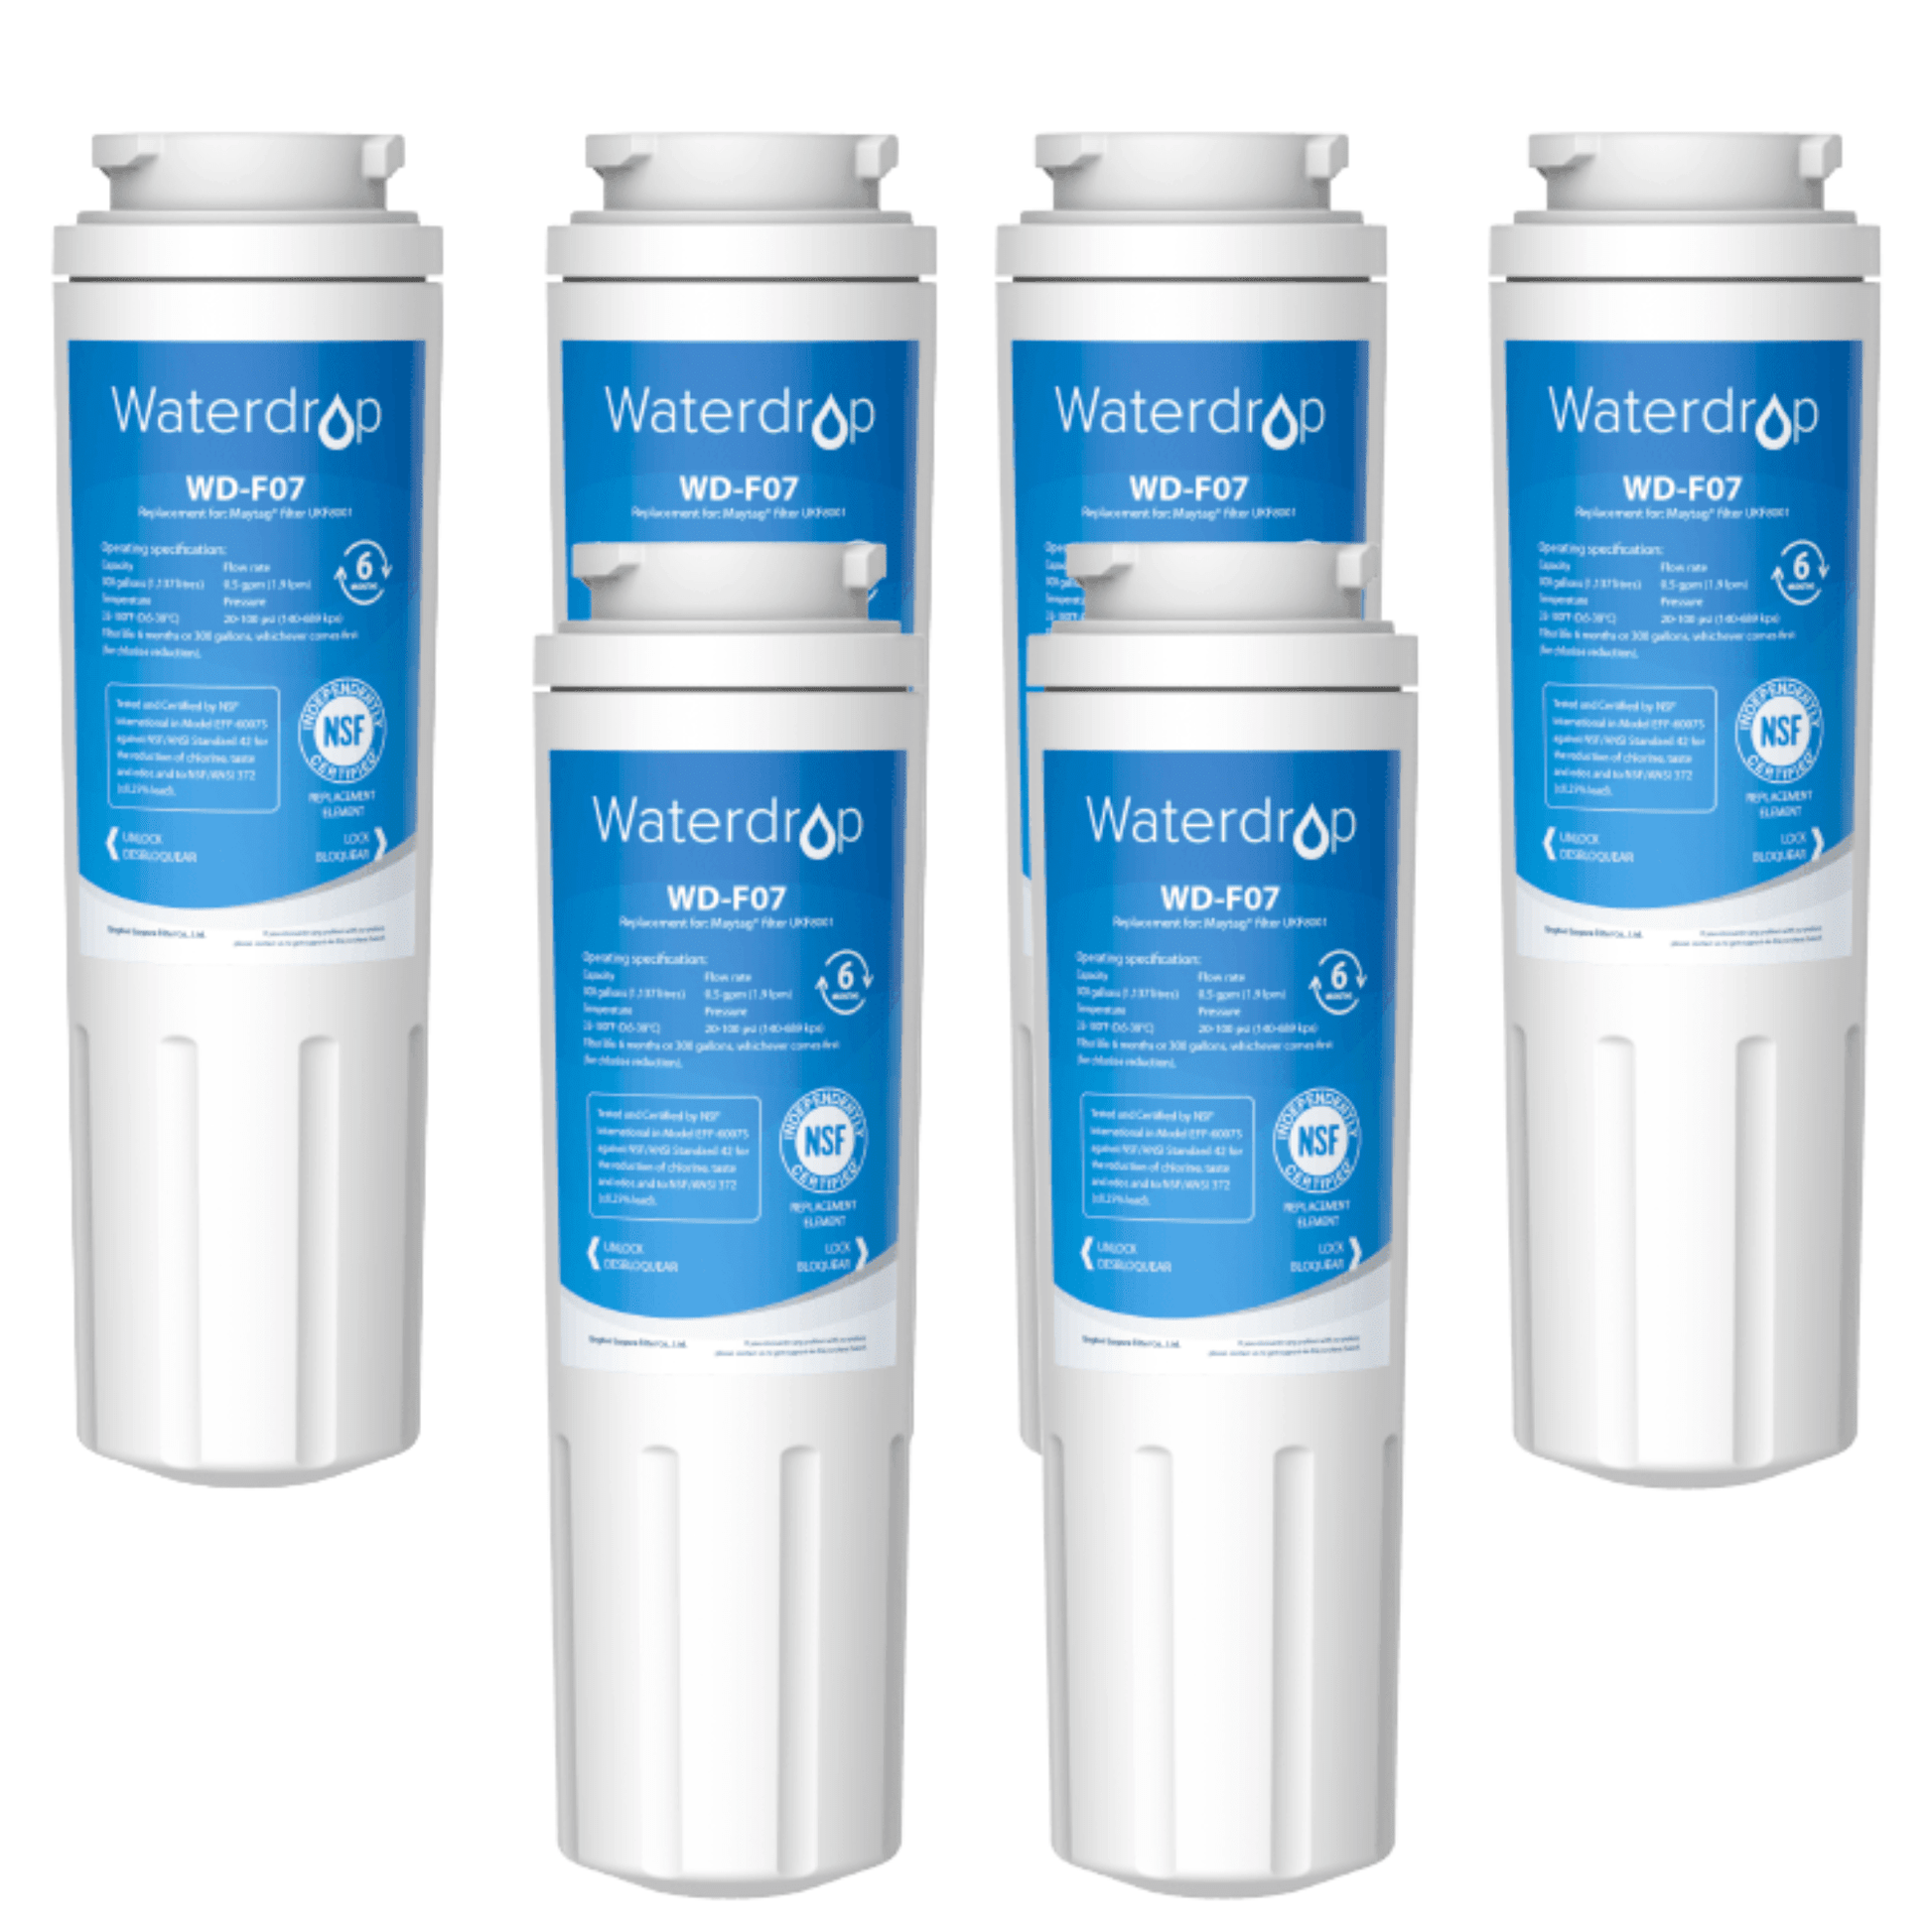 4-Pack Replacement for KitchenAid KFCO22EVBL Refrigerator Water Filter -  Compatible with KitchenAid 4396395 Fridge Water Filter Cartridge